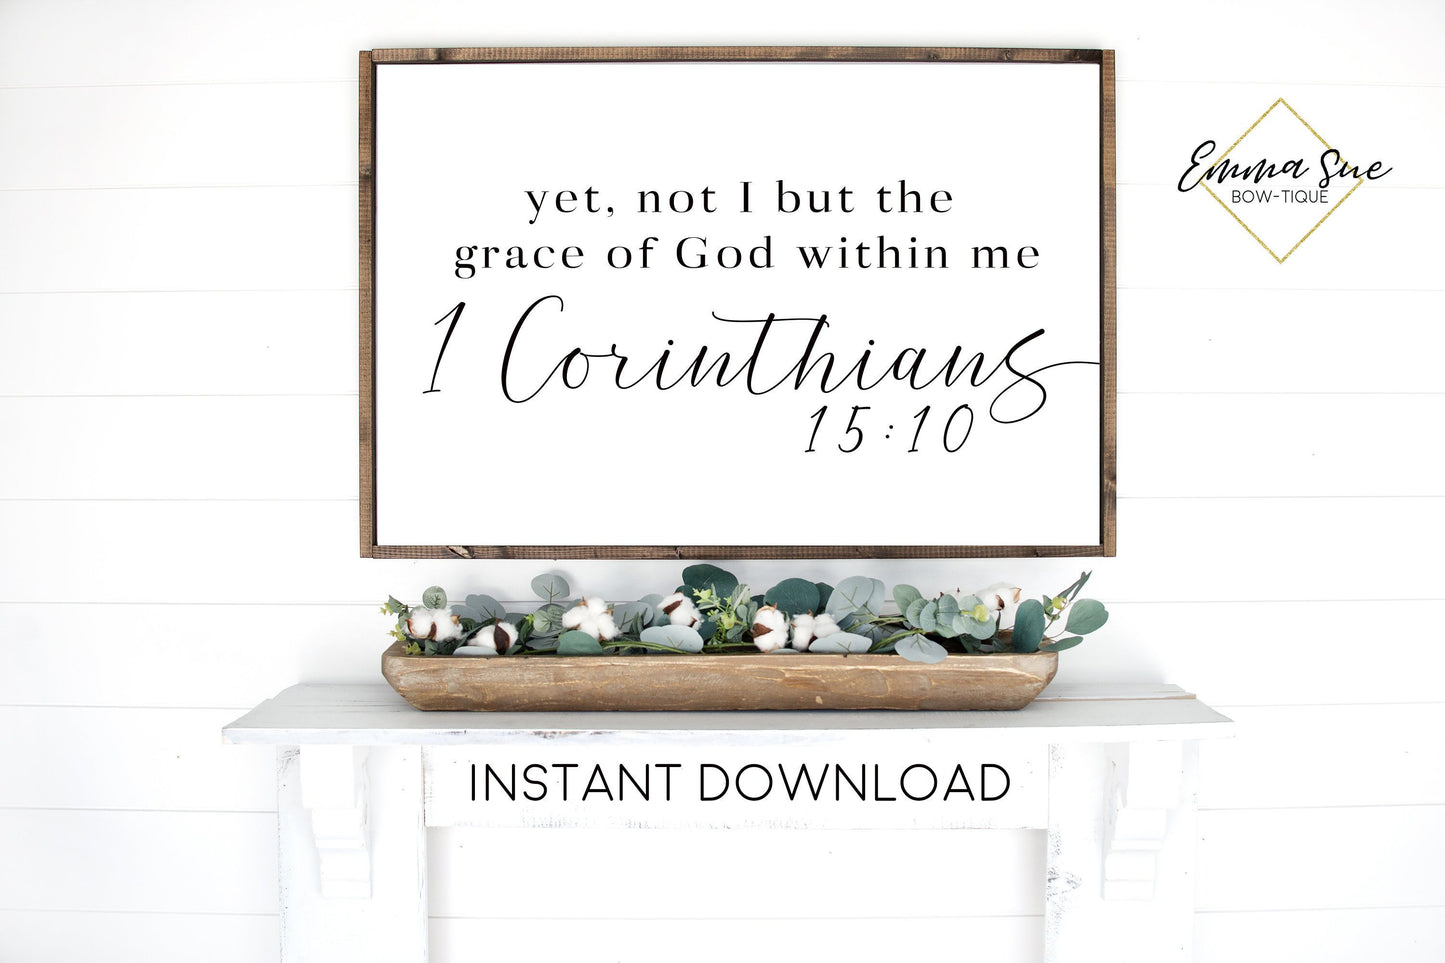 Yet, not I but the grace of God within me 1 Corinthians 15:10 Bible Verse Printable Sign